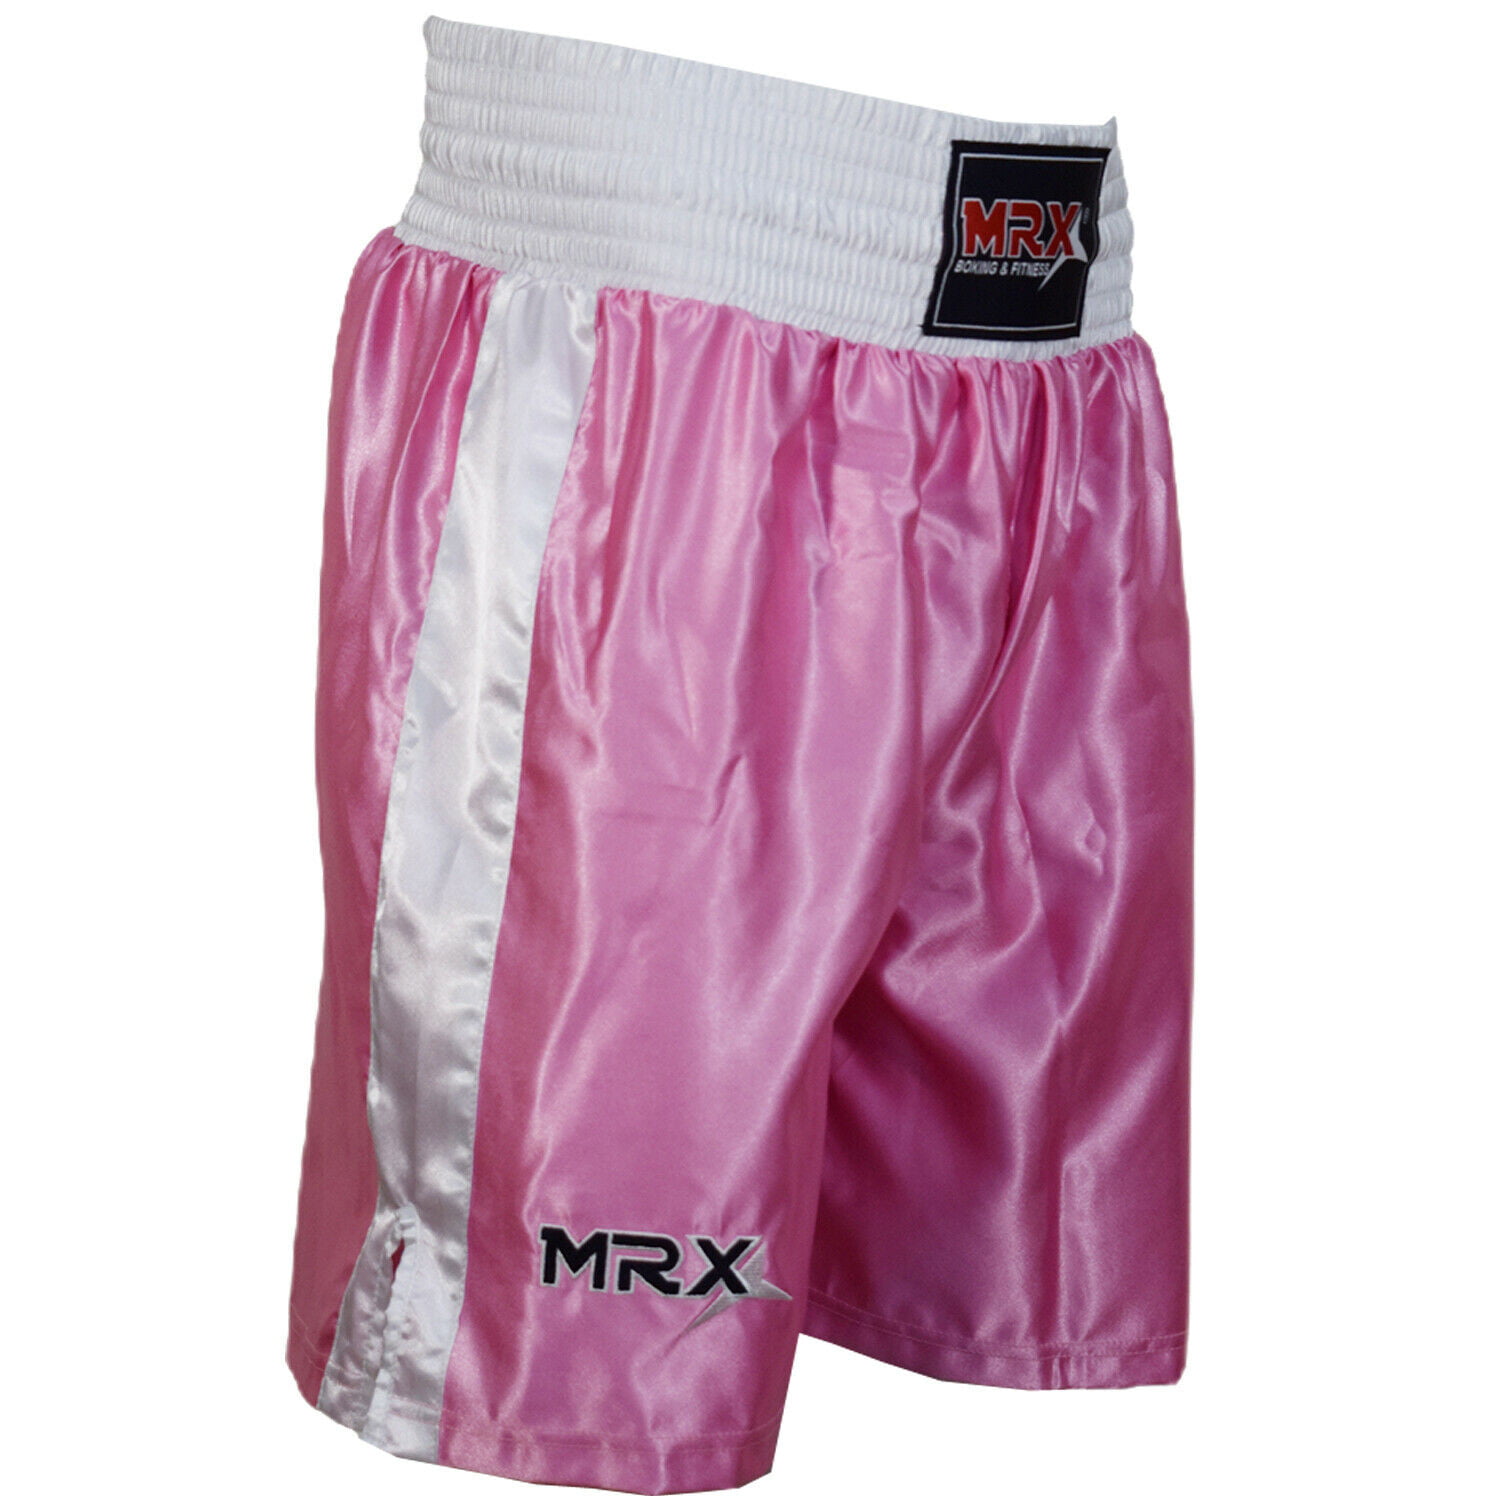 MRX Muay Thai Shorts Boxing Cage Fight Fighter MMA Kick Boxing Trunk Mens Womens 